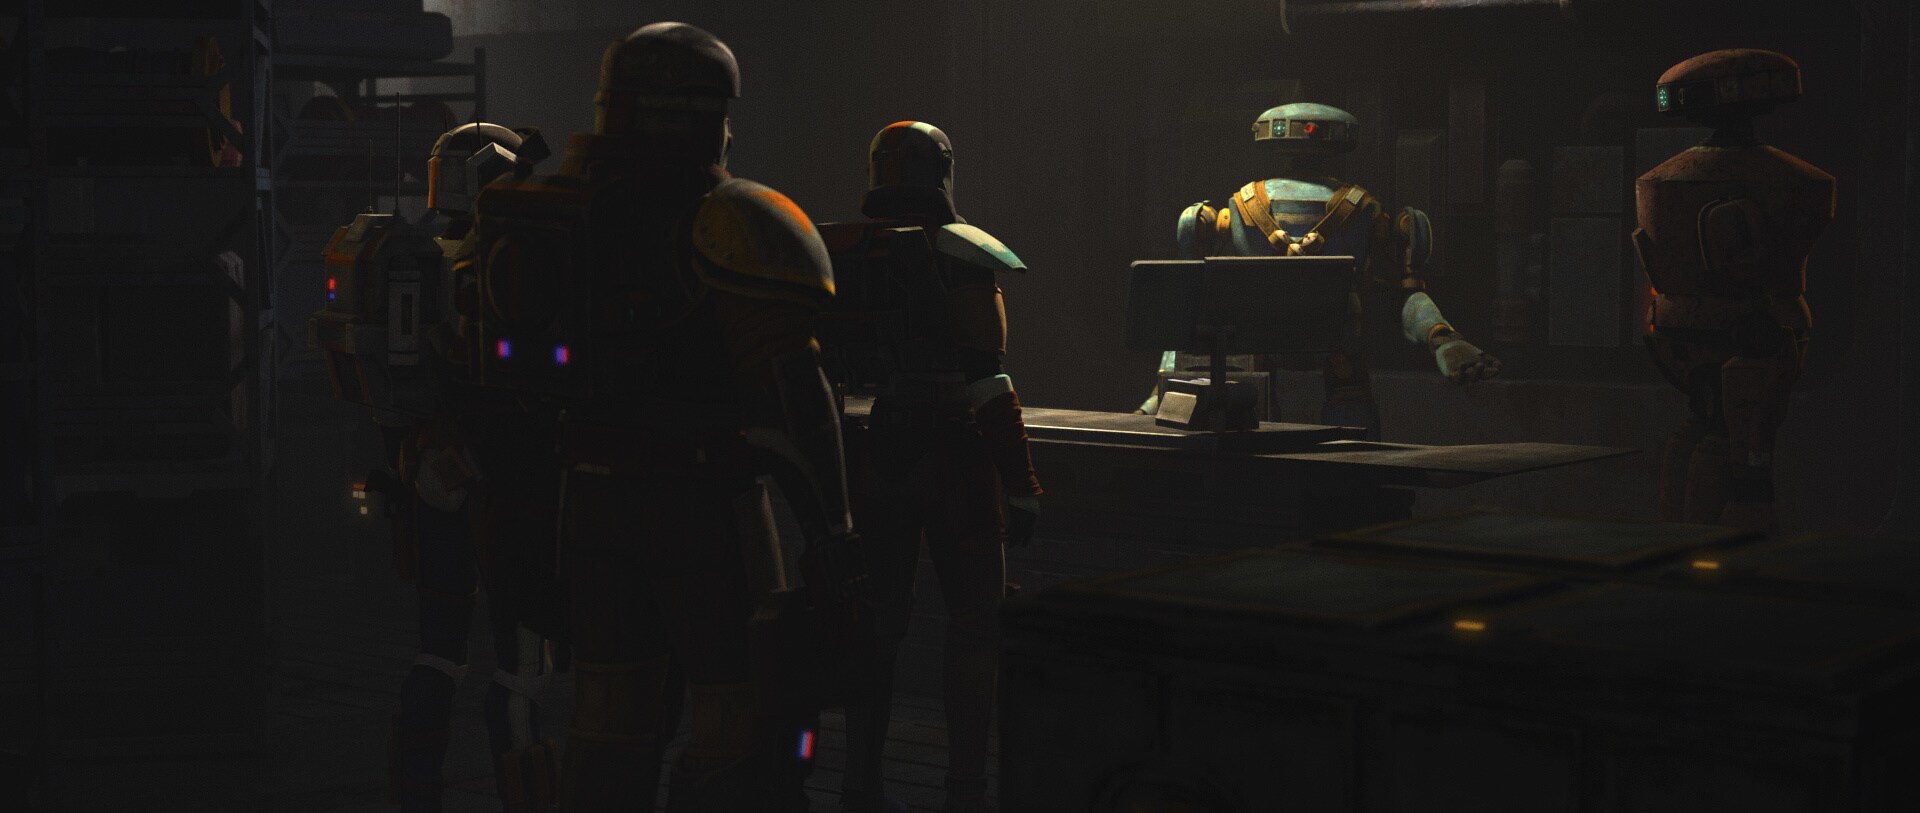 While the droids check Tech's handiwork, Echo preps the ship to make a quick exit as soon as the deal is done. 